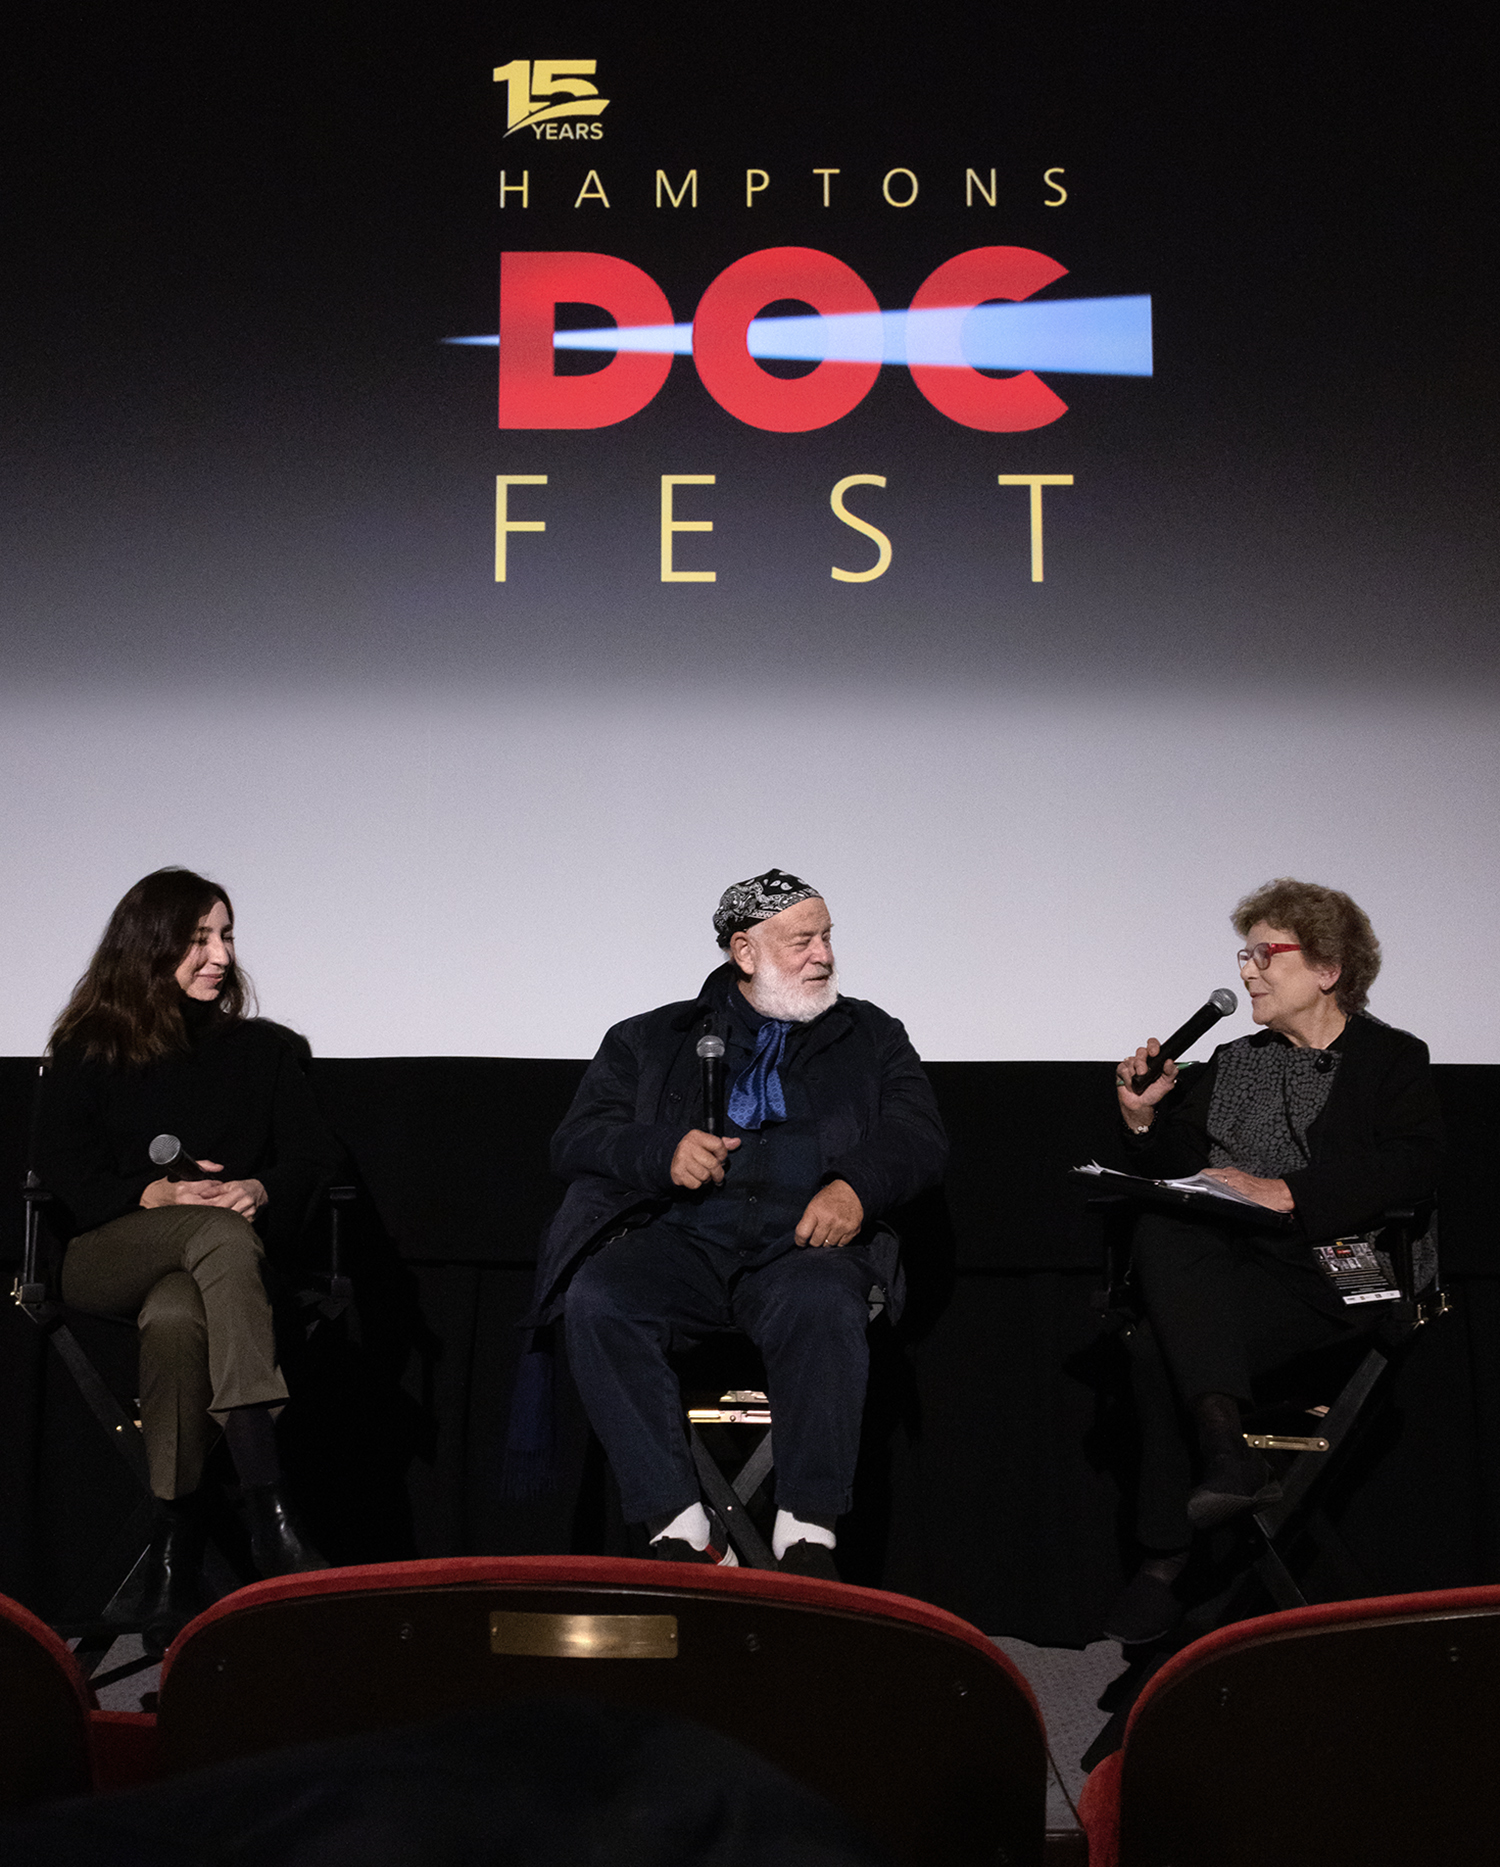 Hamptons Doc Fest executive director Jacqui Lofaro, right, leading the Q&A after the screening of “The Treasure of His Youth: The Photographs of Paolo Di Paolo,” on December  4 at Sag Harbor Cinema, with daughter Sylvia Di Paolo (who found the trove of his photos) and director Bruce Weber. CB GRUBB/COURTESY HAMPTONS DOC FEST